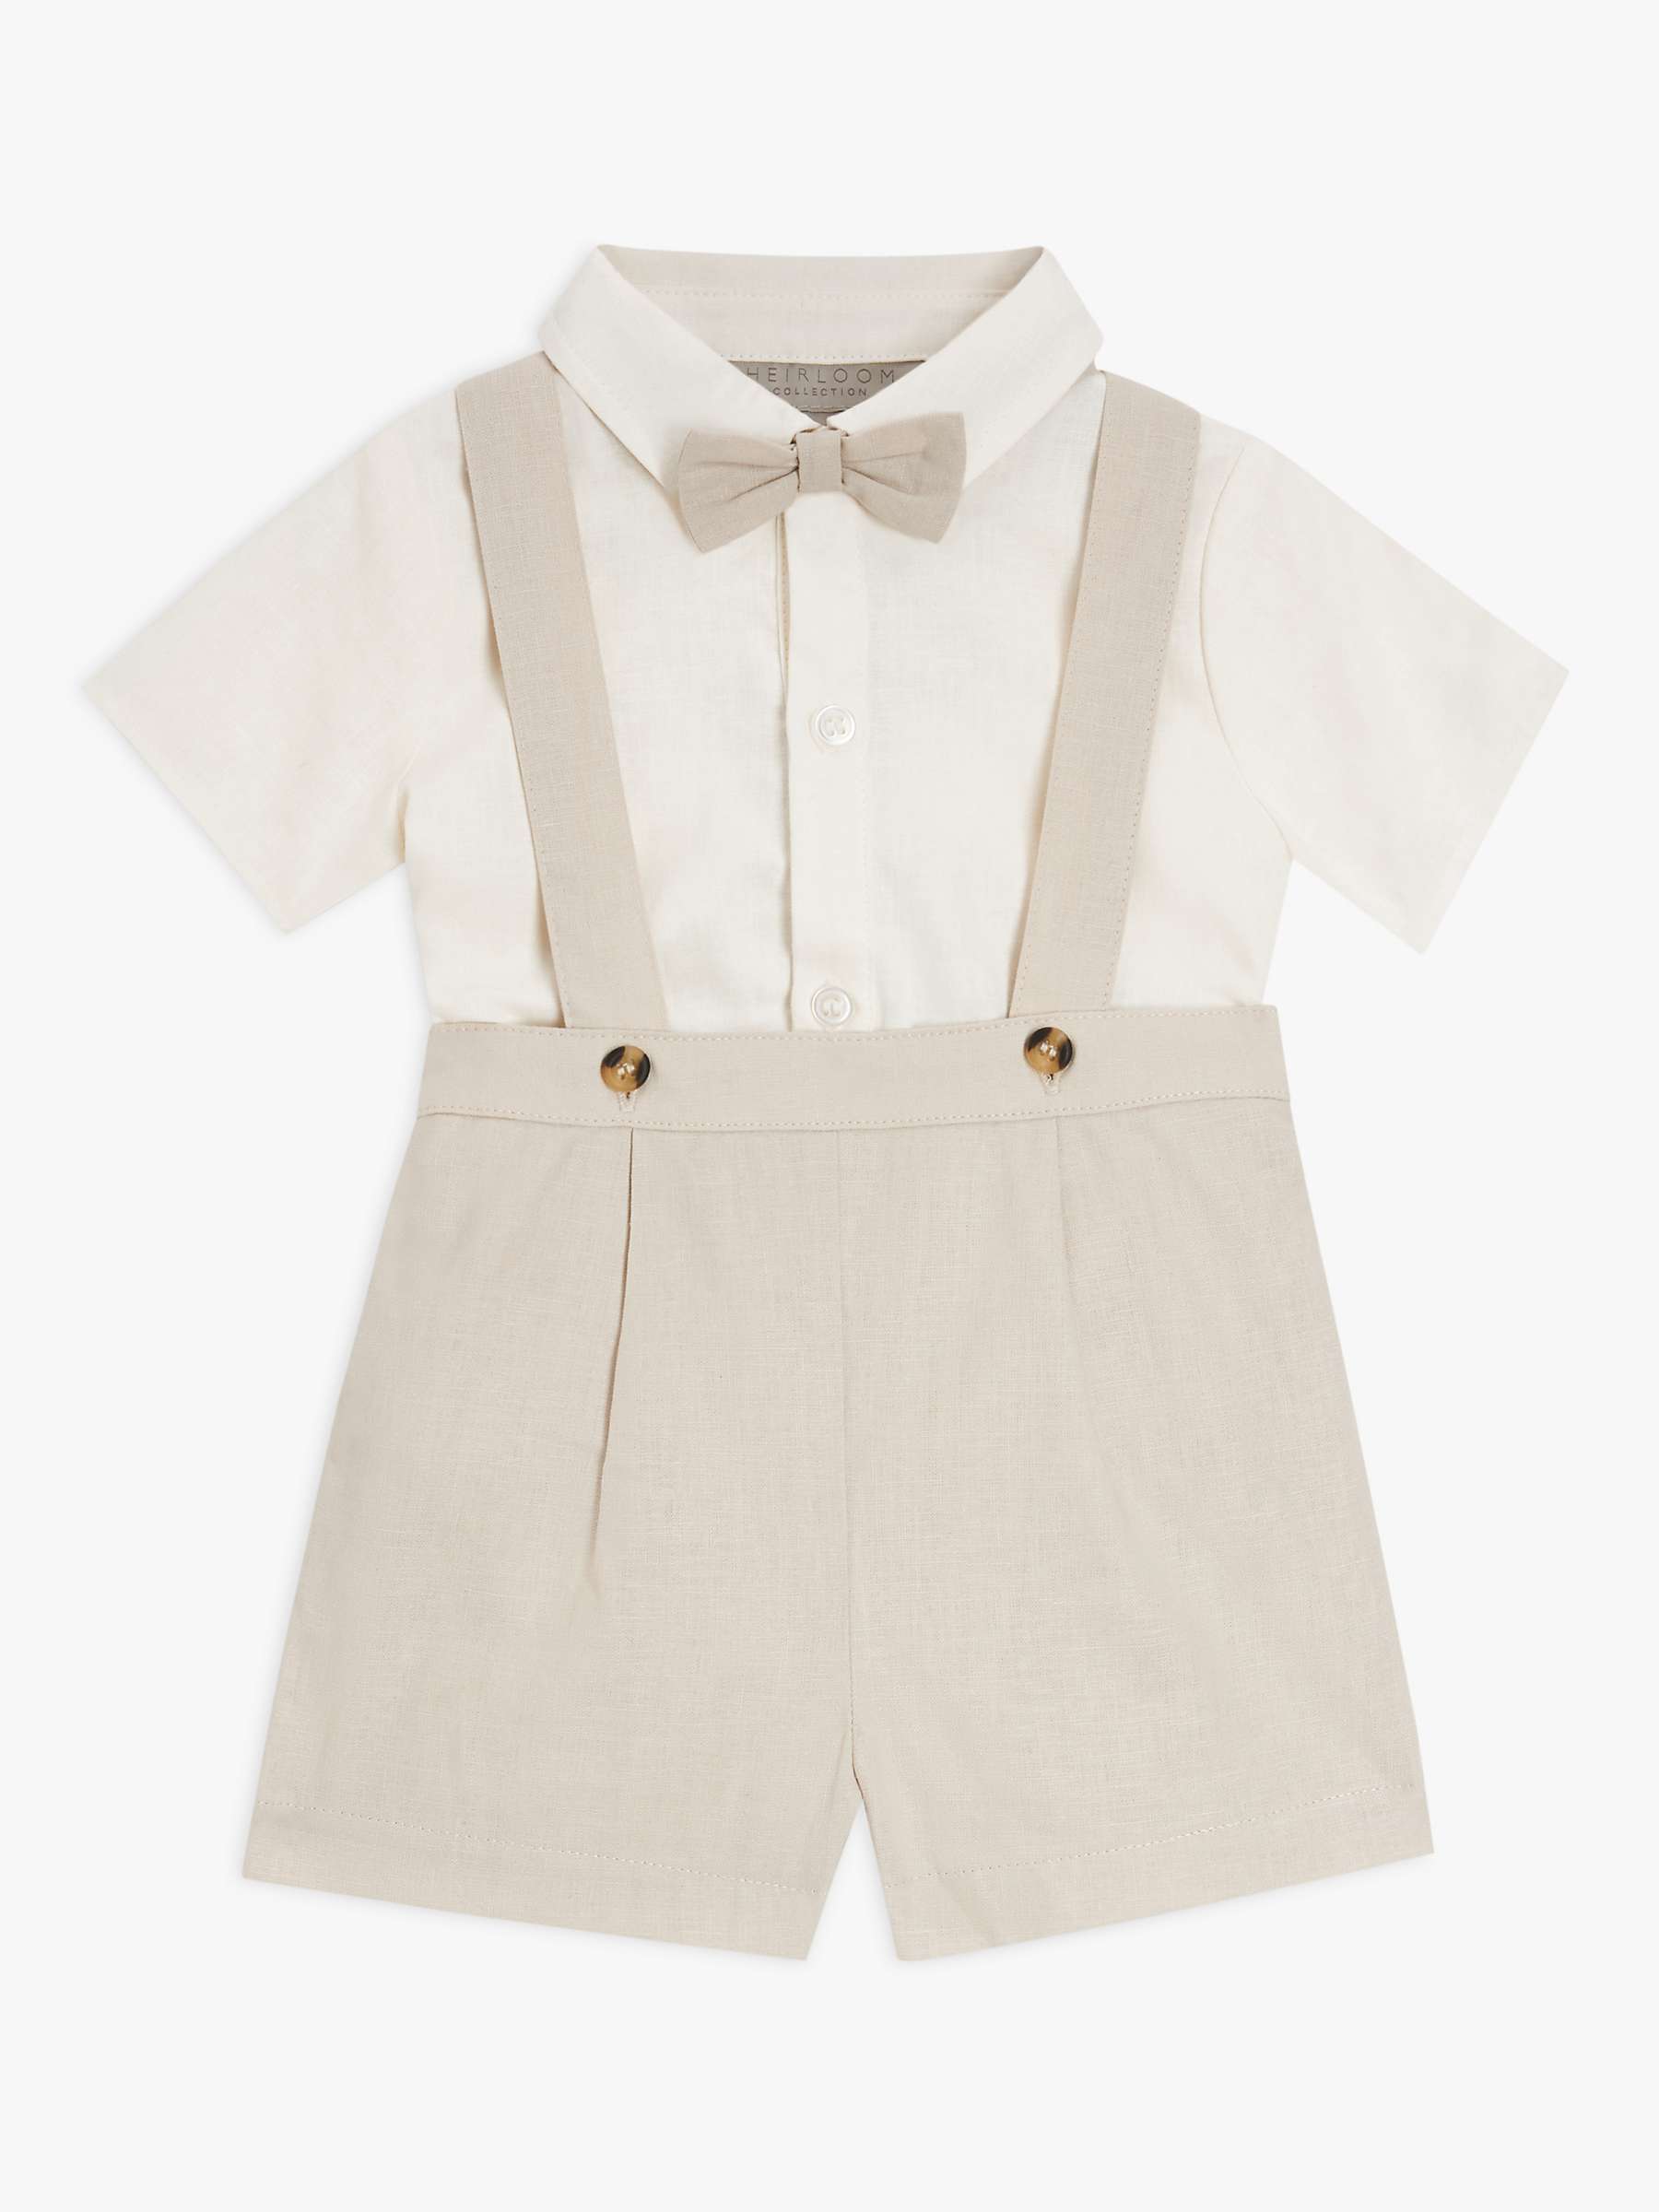 Buy John Lewis Heirloom Collection Baby Linen Bodysuit and Braces Set, White Online at johnlewis.com